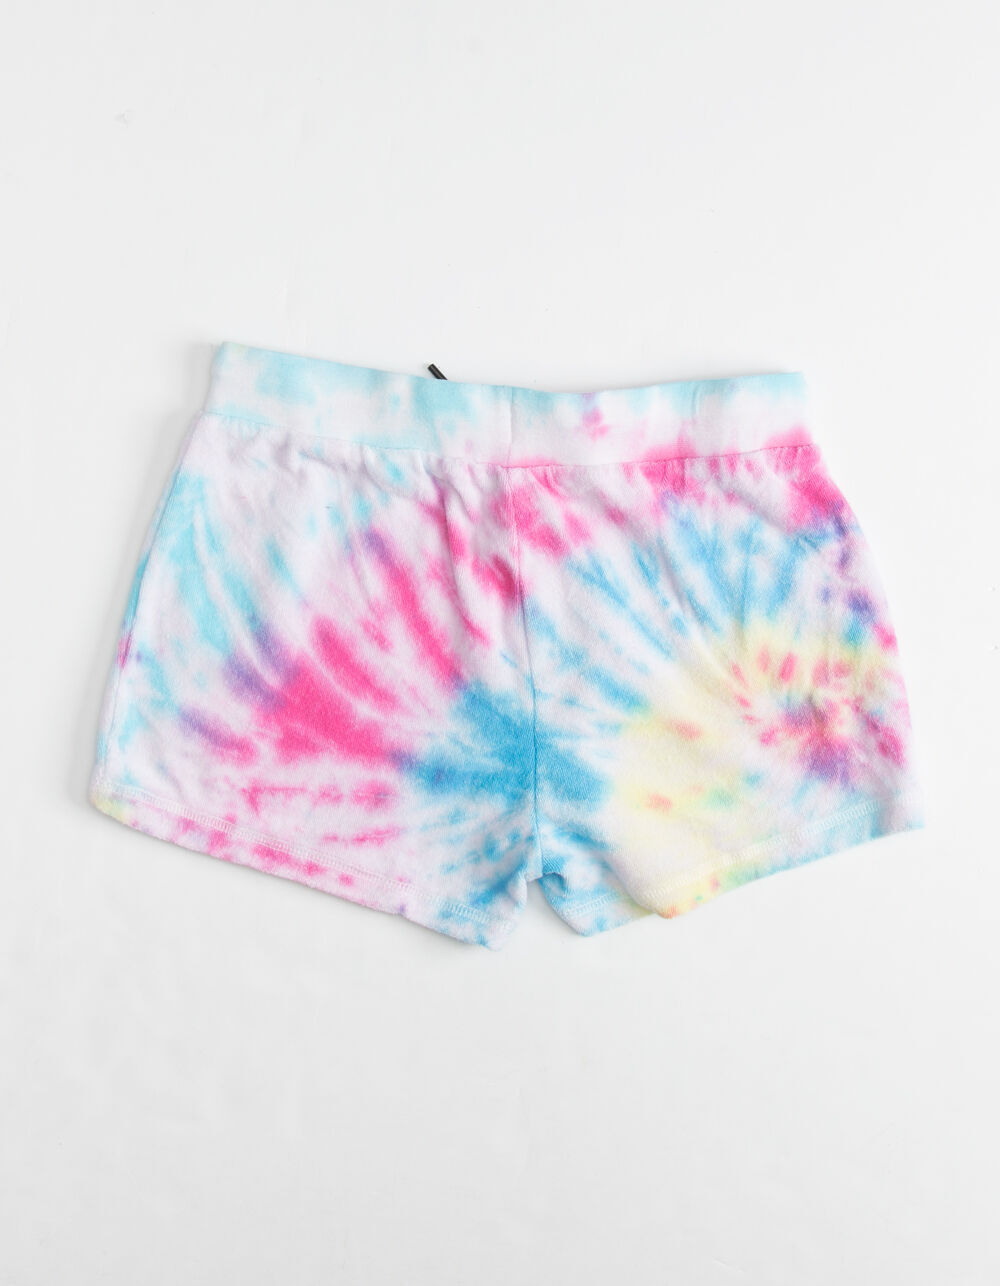 MAUI AND SONS Tie Dye Girls Terry Shorts - MULTI | Tillys